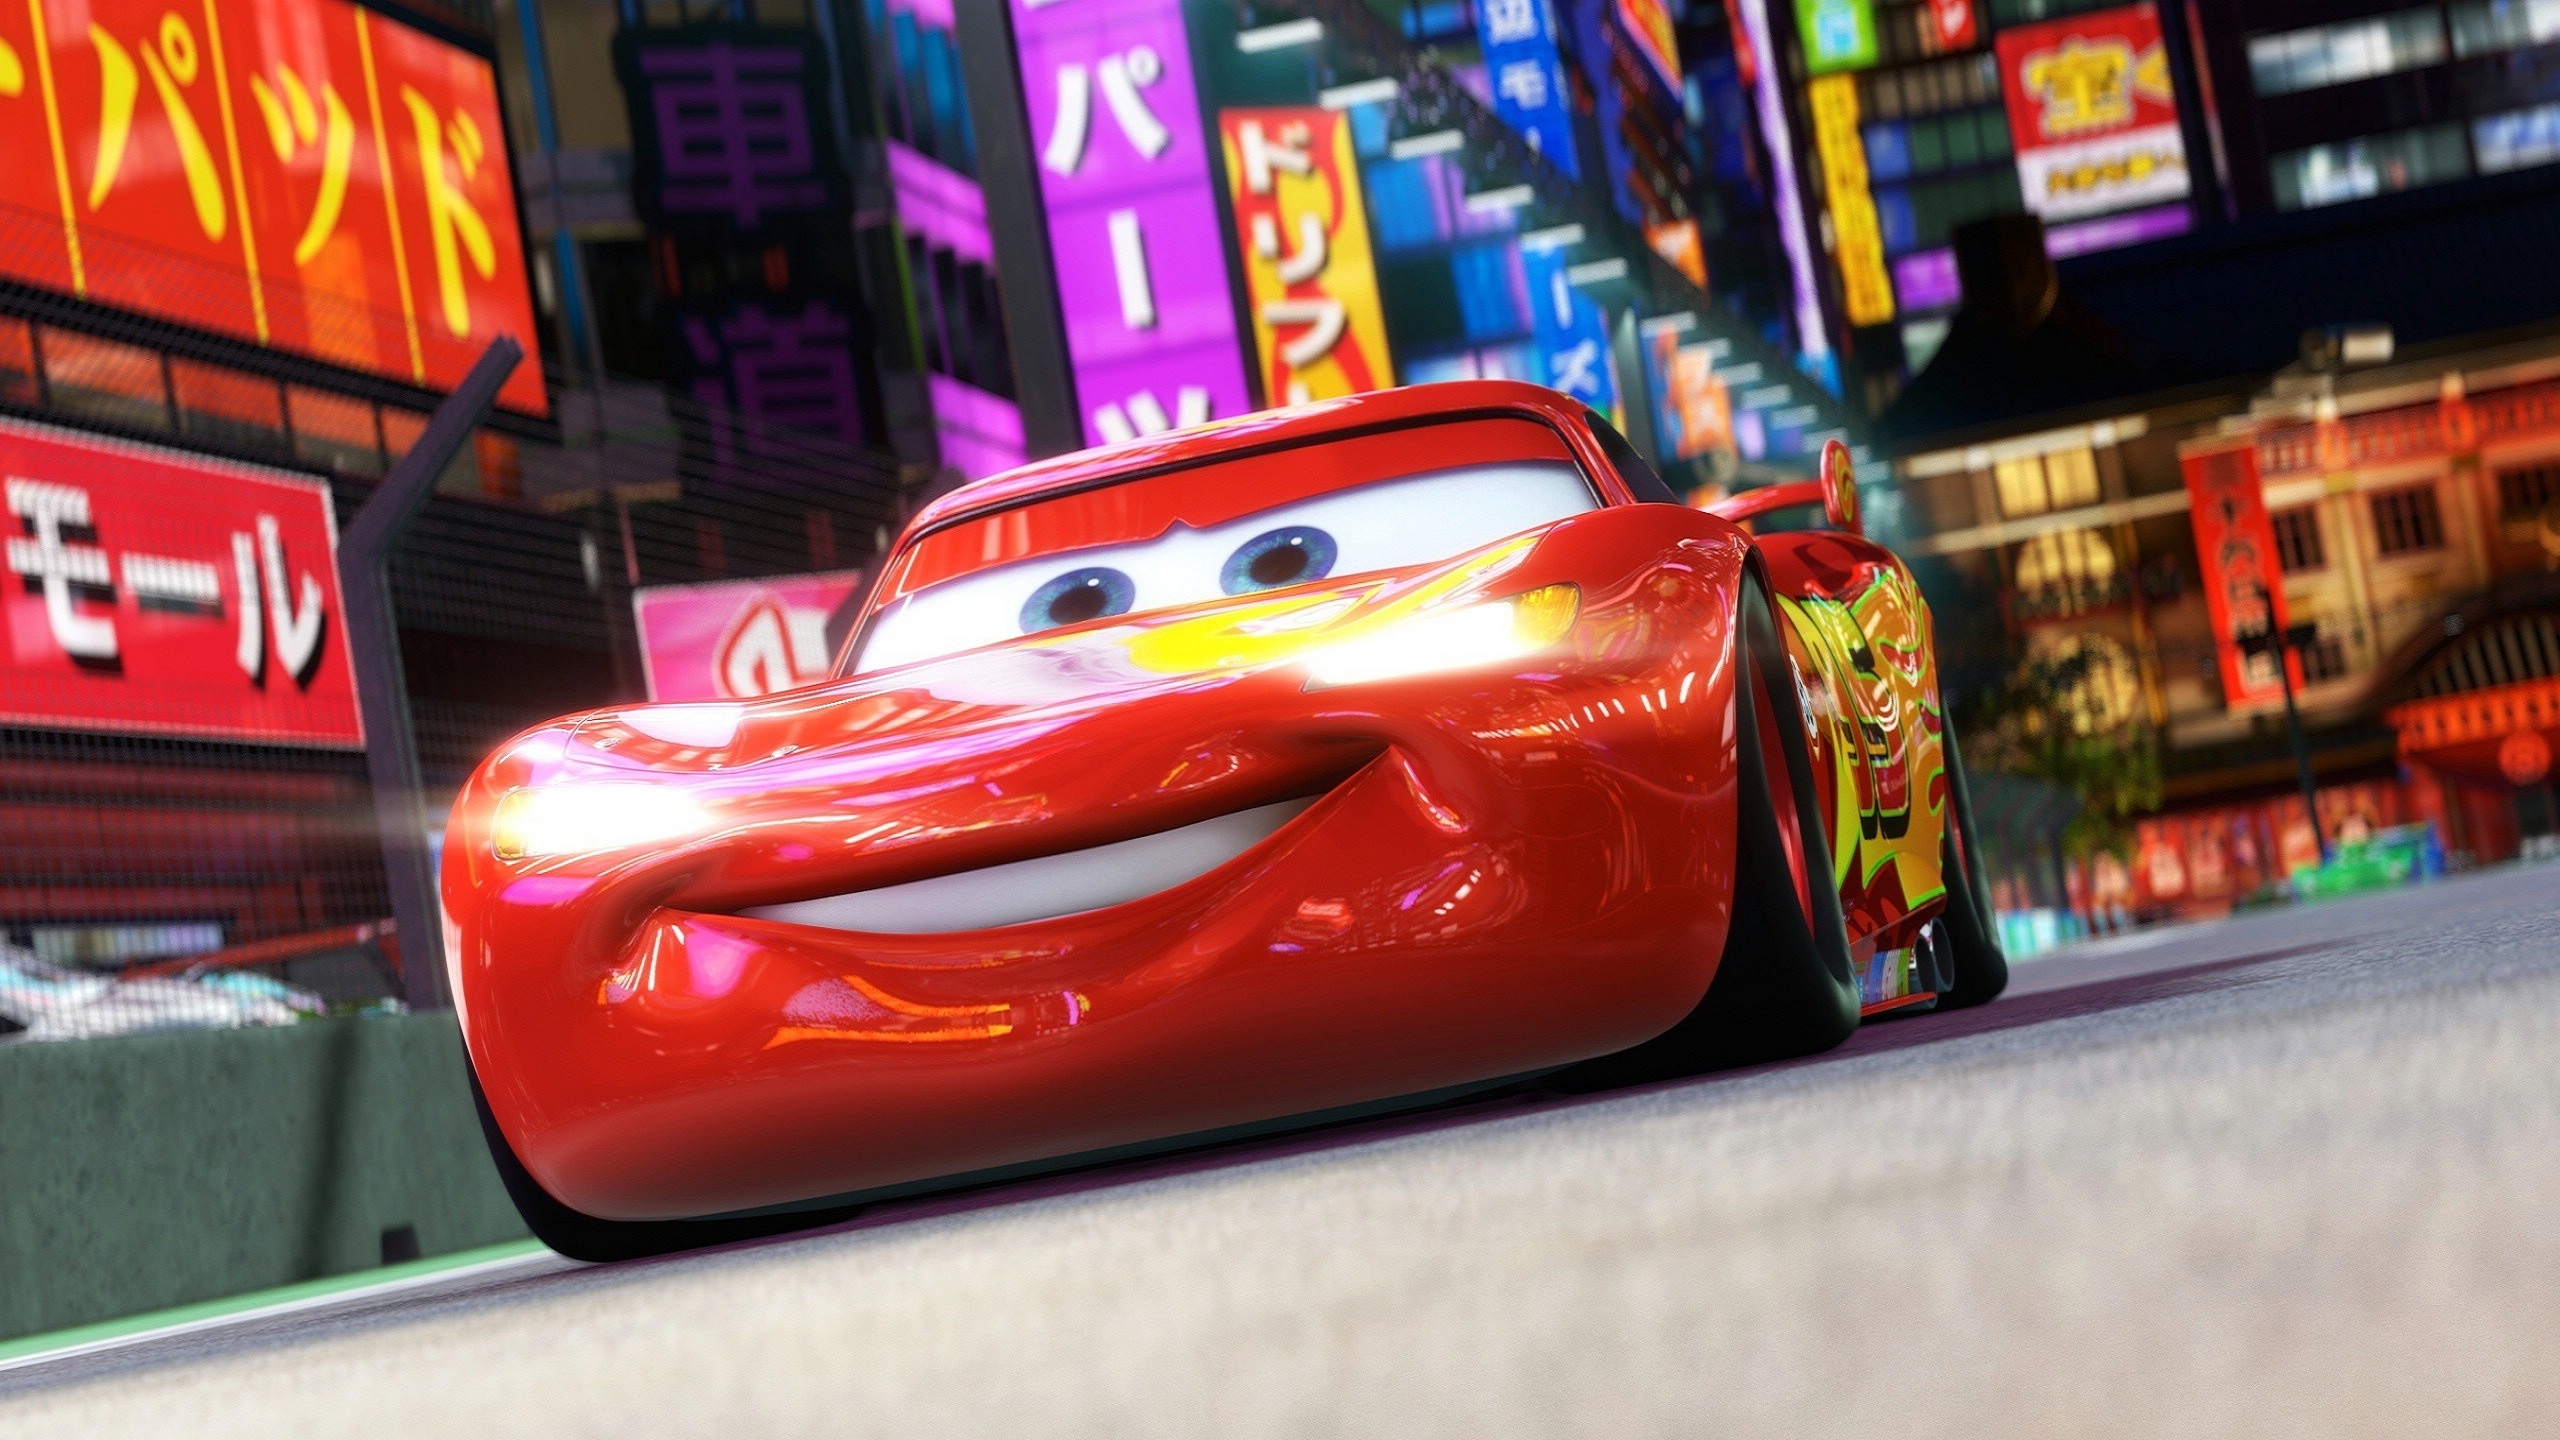 Cars 3 Movie for 2560 x 1440 HDTV resolution